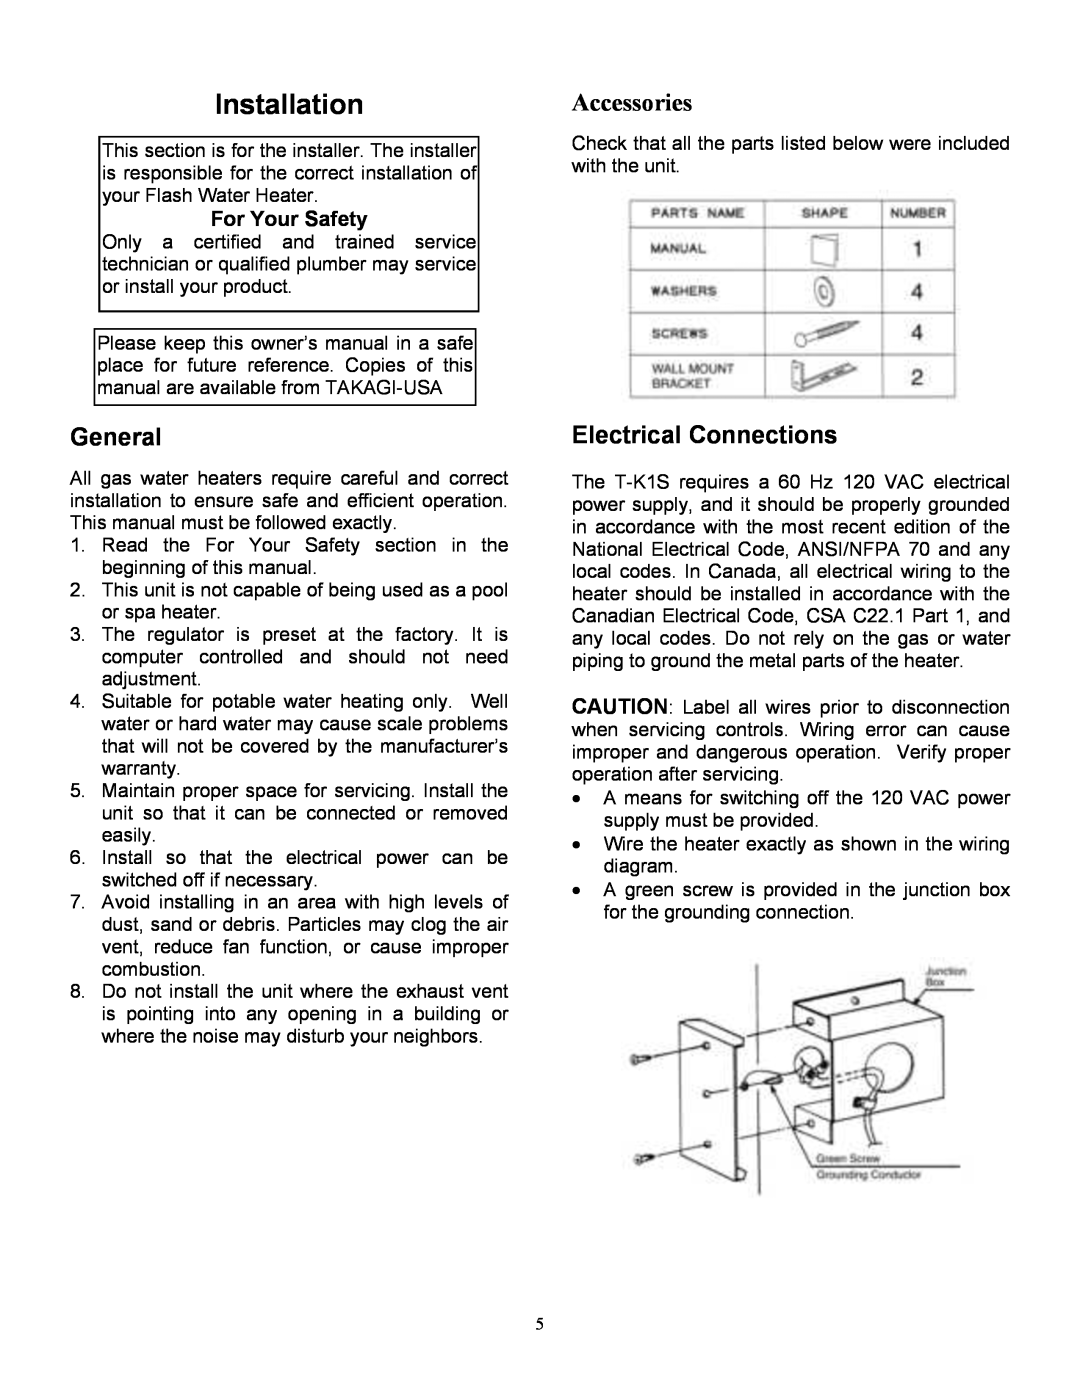 Whirlpool T-K1S installation manual Installation, General, Electrical Connections, Accessories, For Your Safety 